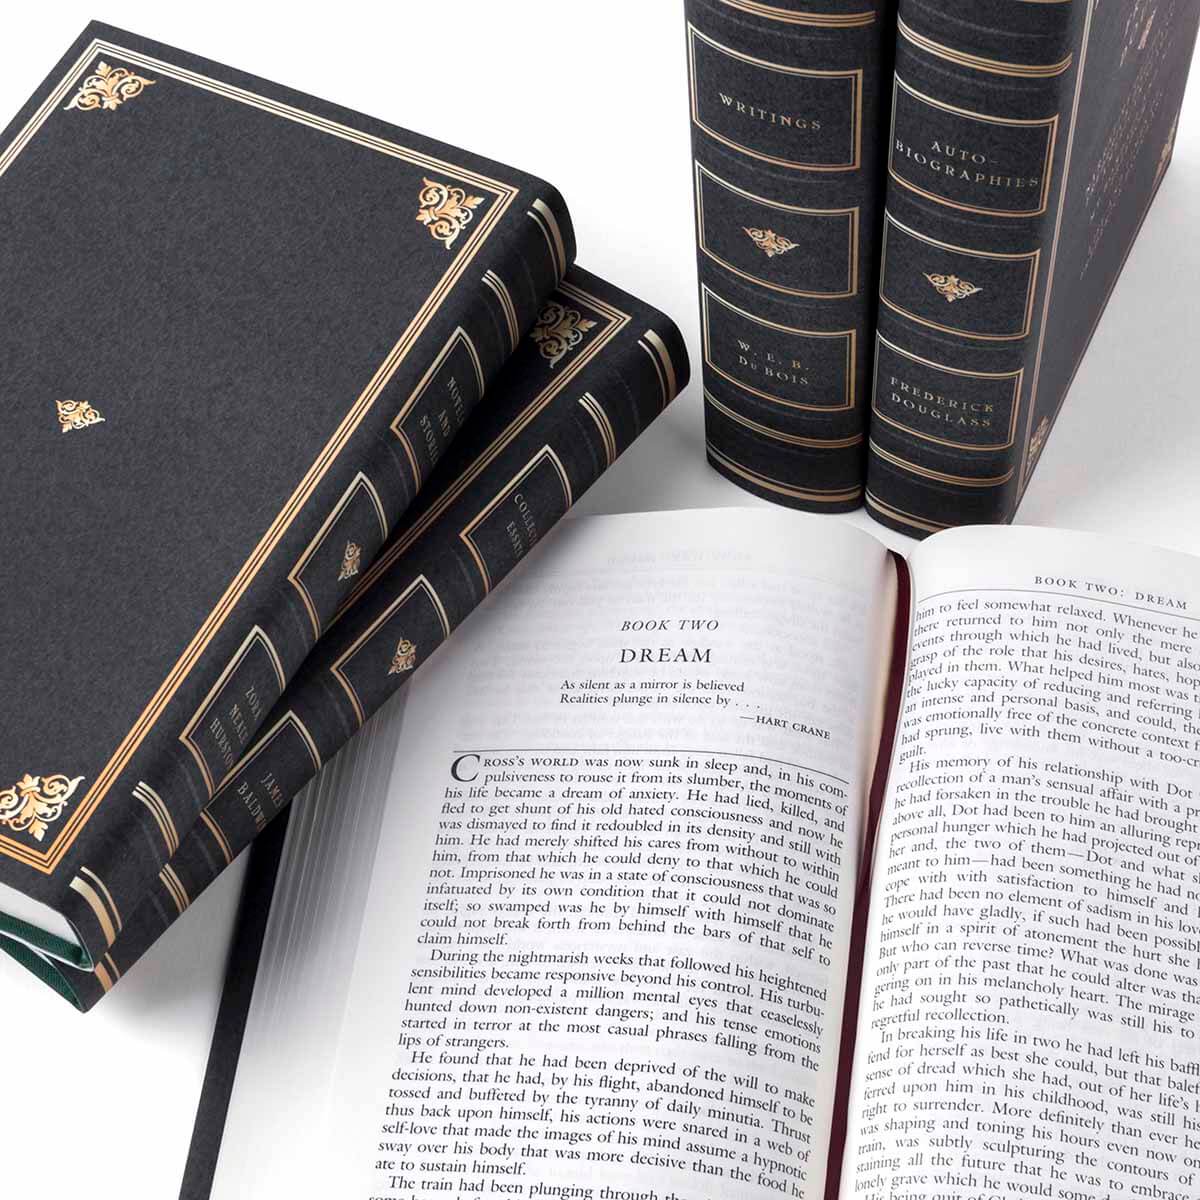 Custom Book Set to enhance your collection! Makes a beautiful gift for fans of african american classic literature and a gorgeous piece on your shelves! Order from JuniperCustom today.